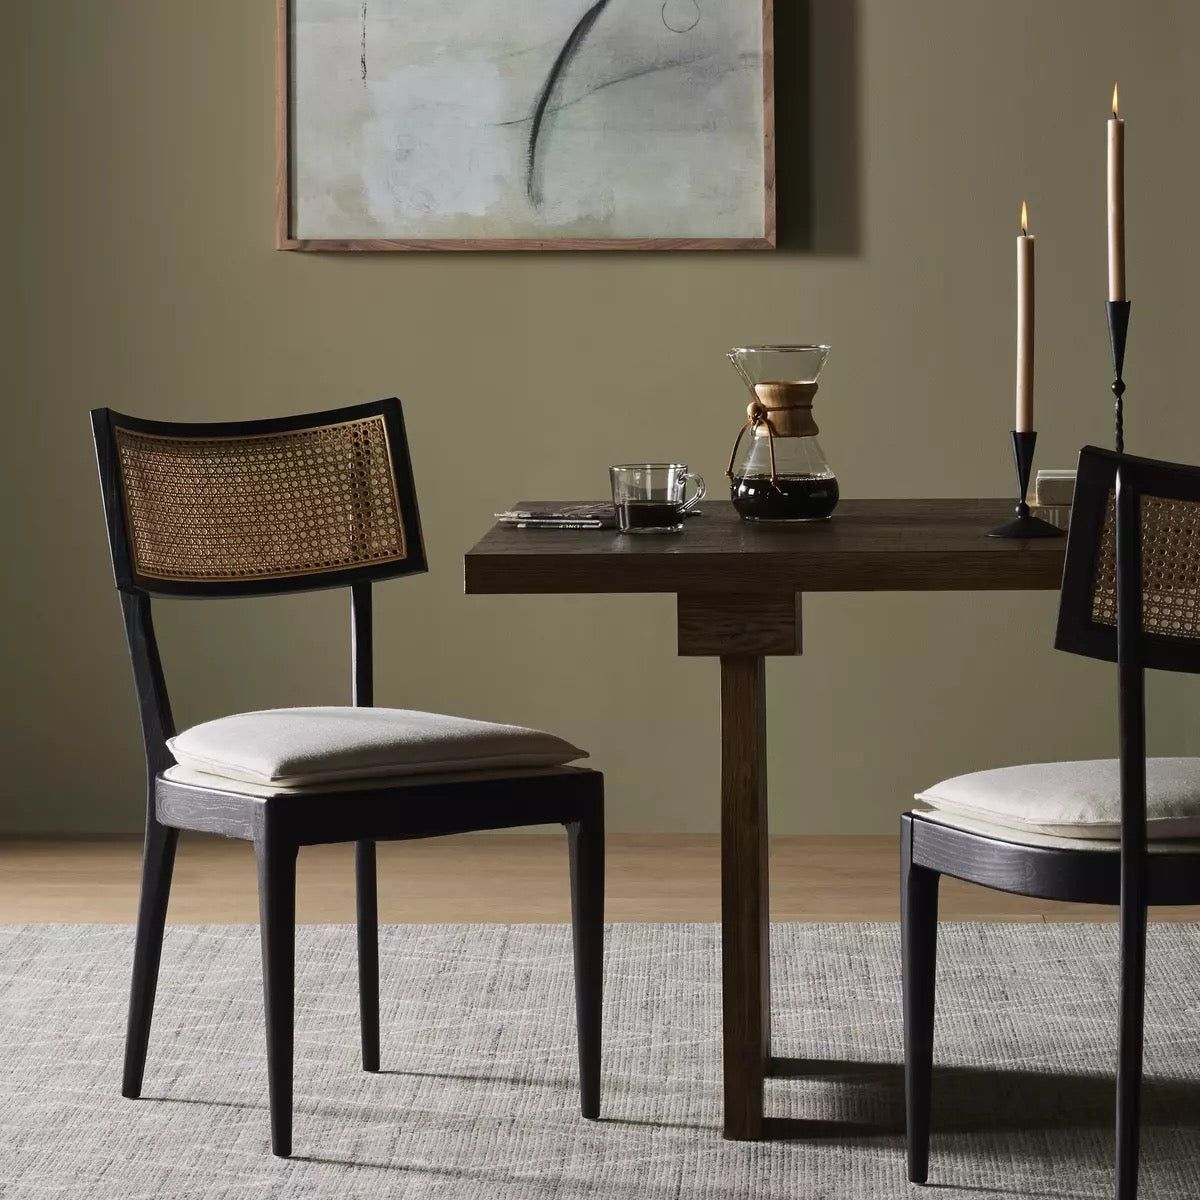 A modern dining area featuring a wooden table with two Britt Dining Chairs. The chairs have woven cane backs and cushioned seats. On the table are a Chemex coffee maker, a small cup, and two lit taper candles. A minimalist abstract painting hangs on the wall behind the table.